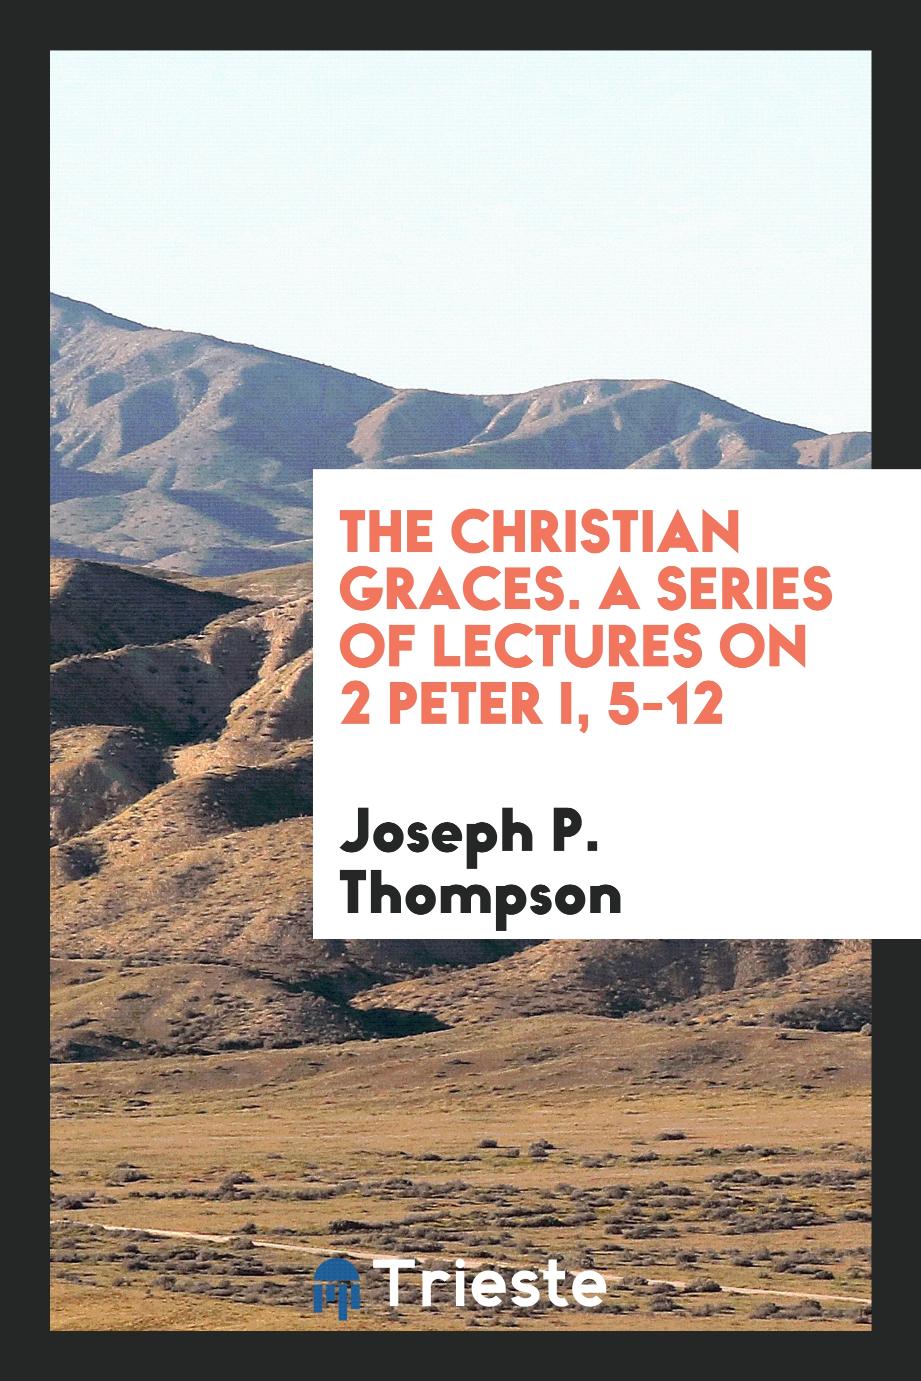 The christian graces. A series of lectures on 2 Peter i, 5-12